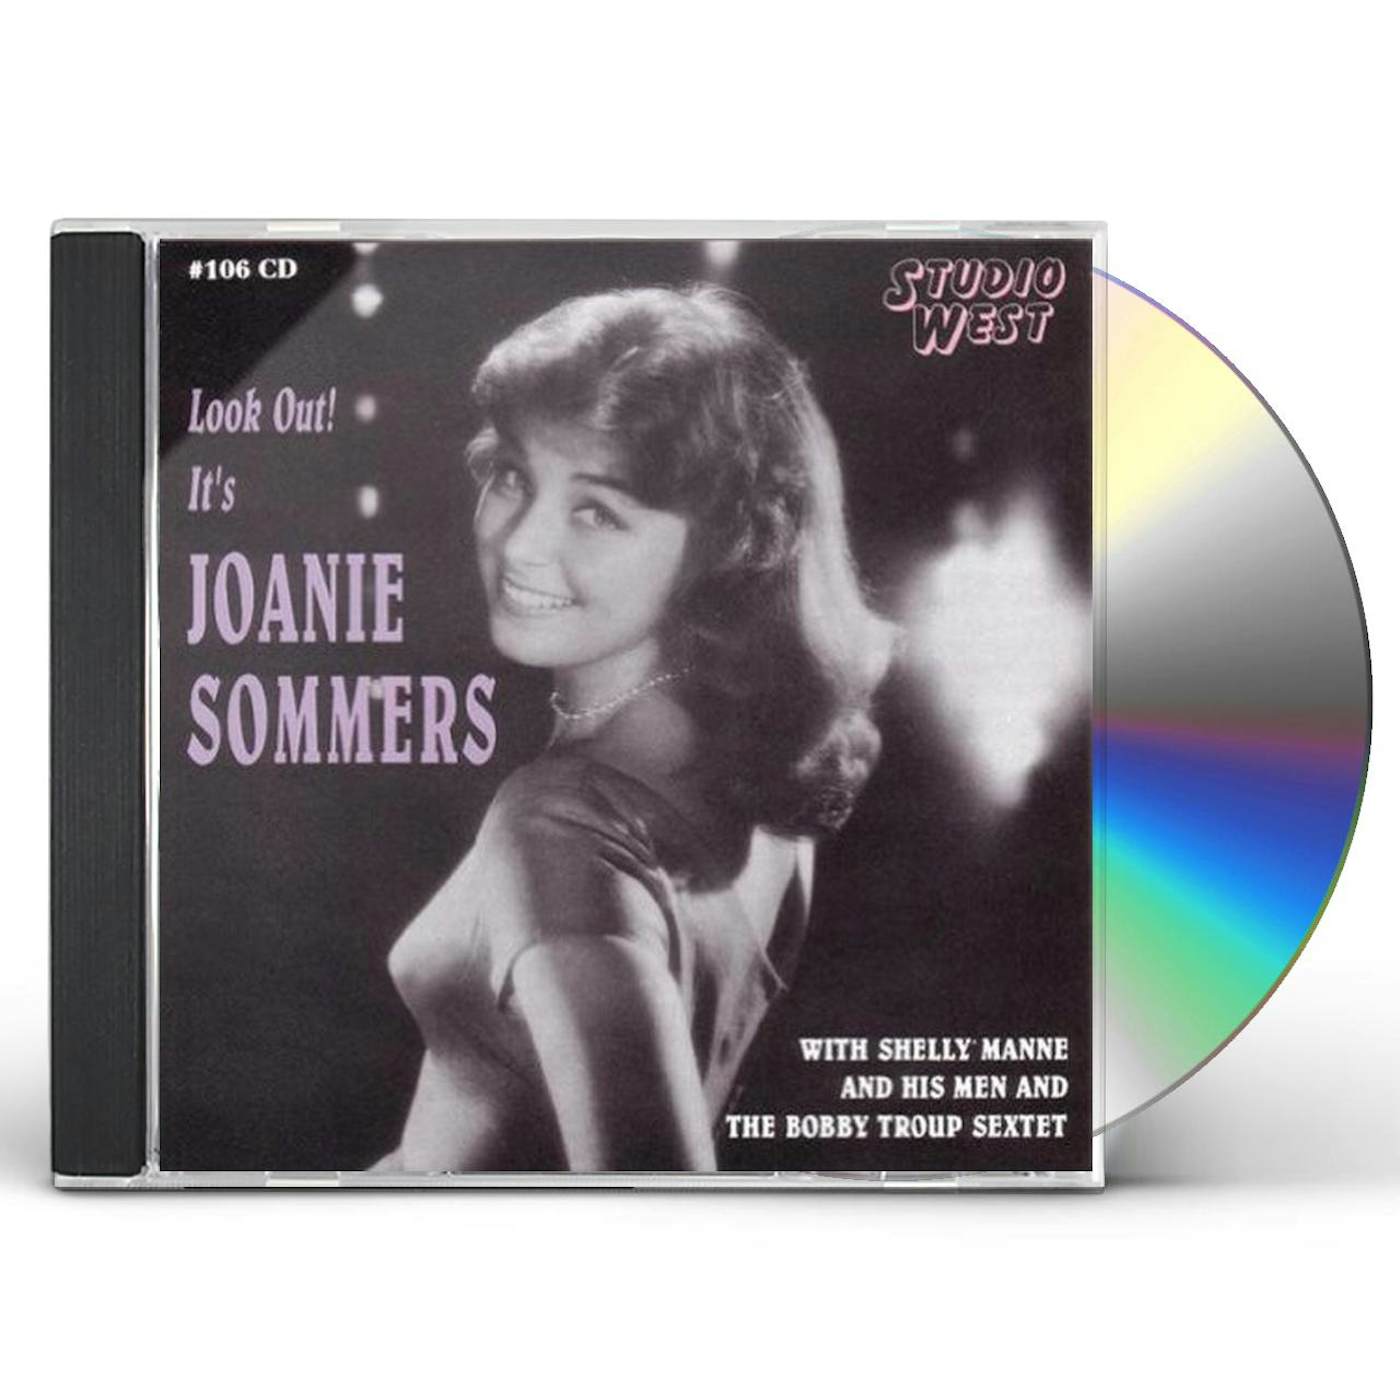 LOOK OUT IT'S JOANIE SOMMERS CD